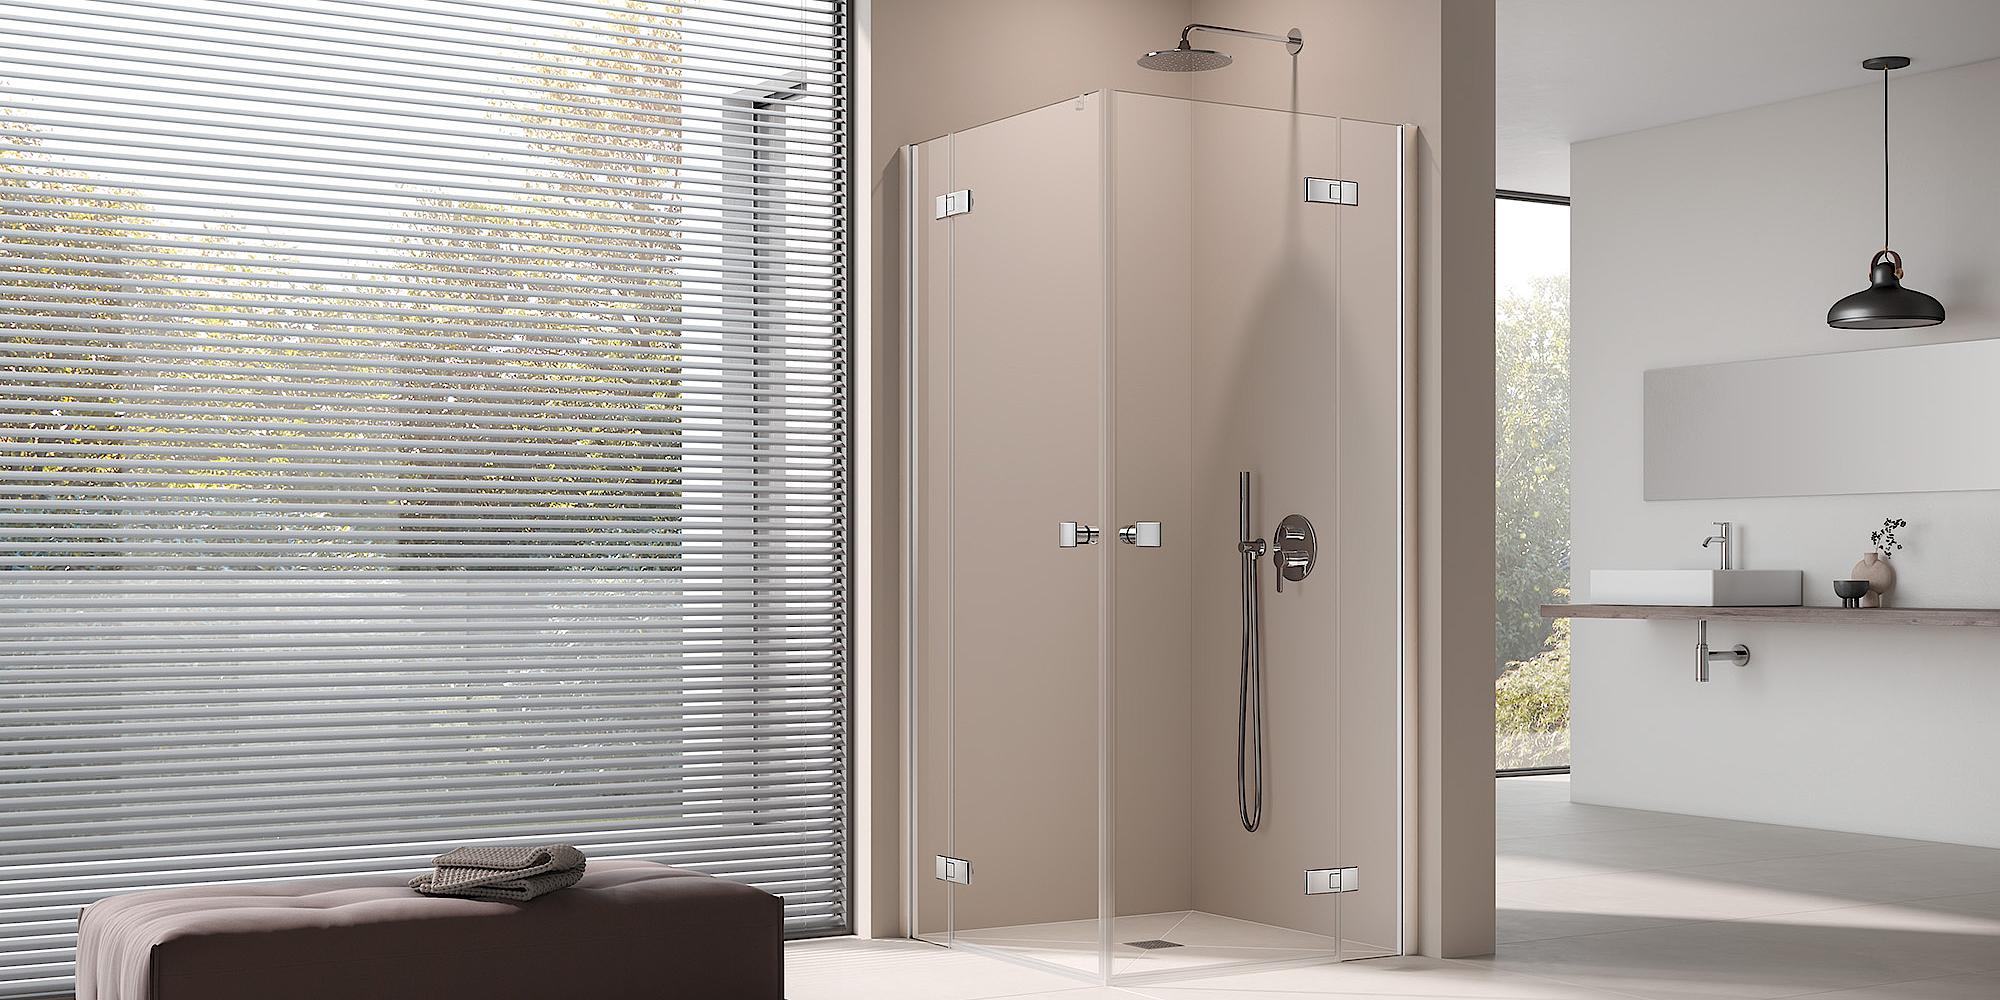 Kermi shower enclosure MENA two-part corner entry (two-part hinged doors with fixed panels) – half part with wall profile